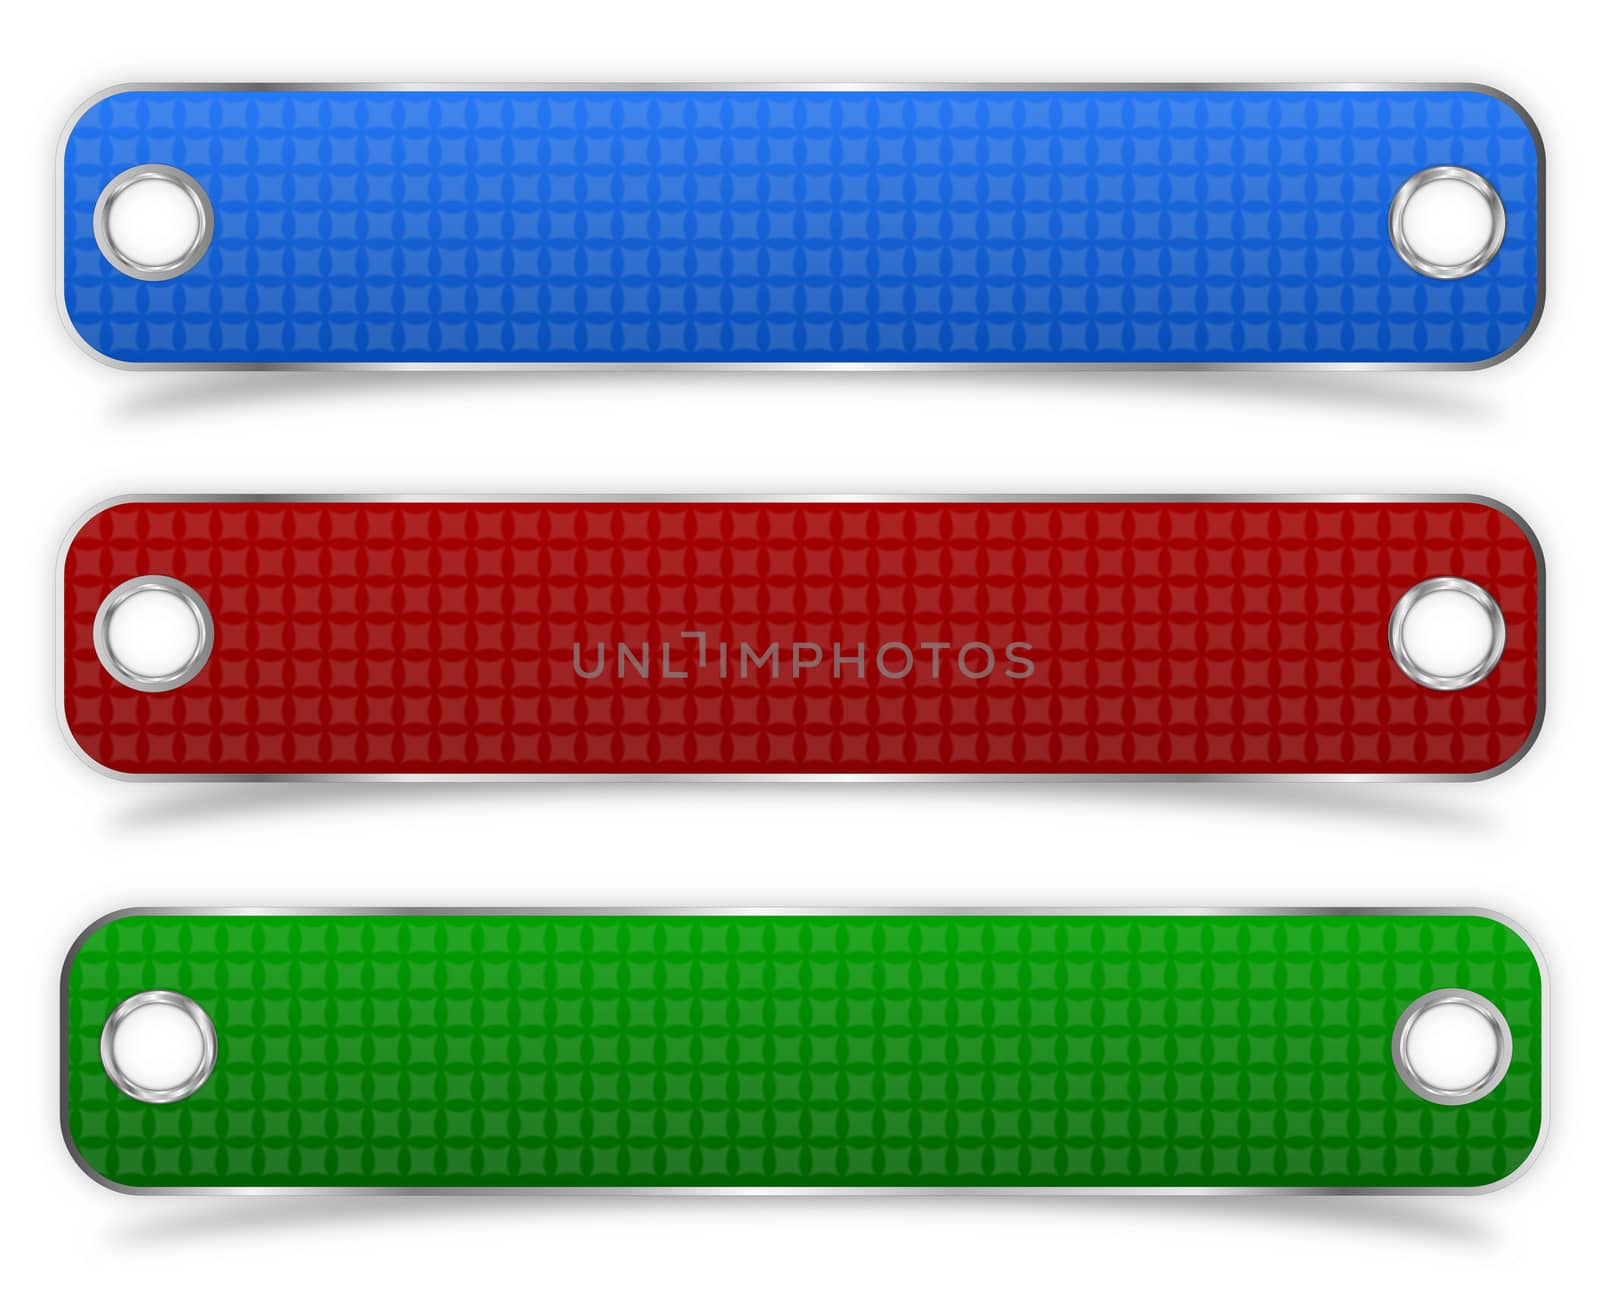 Set of three textured product tags with double chrome metal rivet holes in red green and blue color
